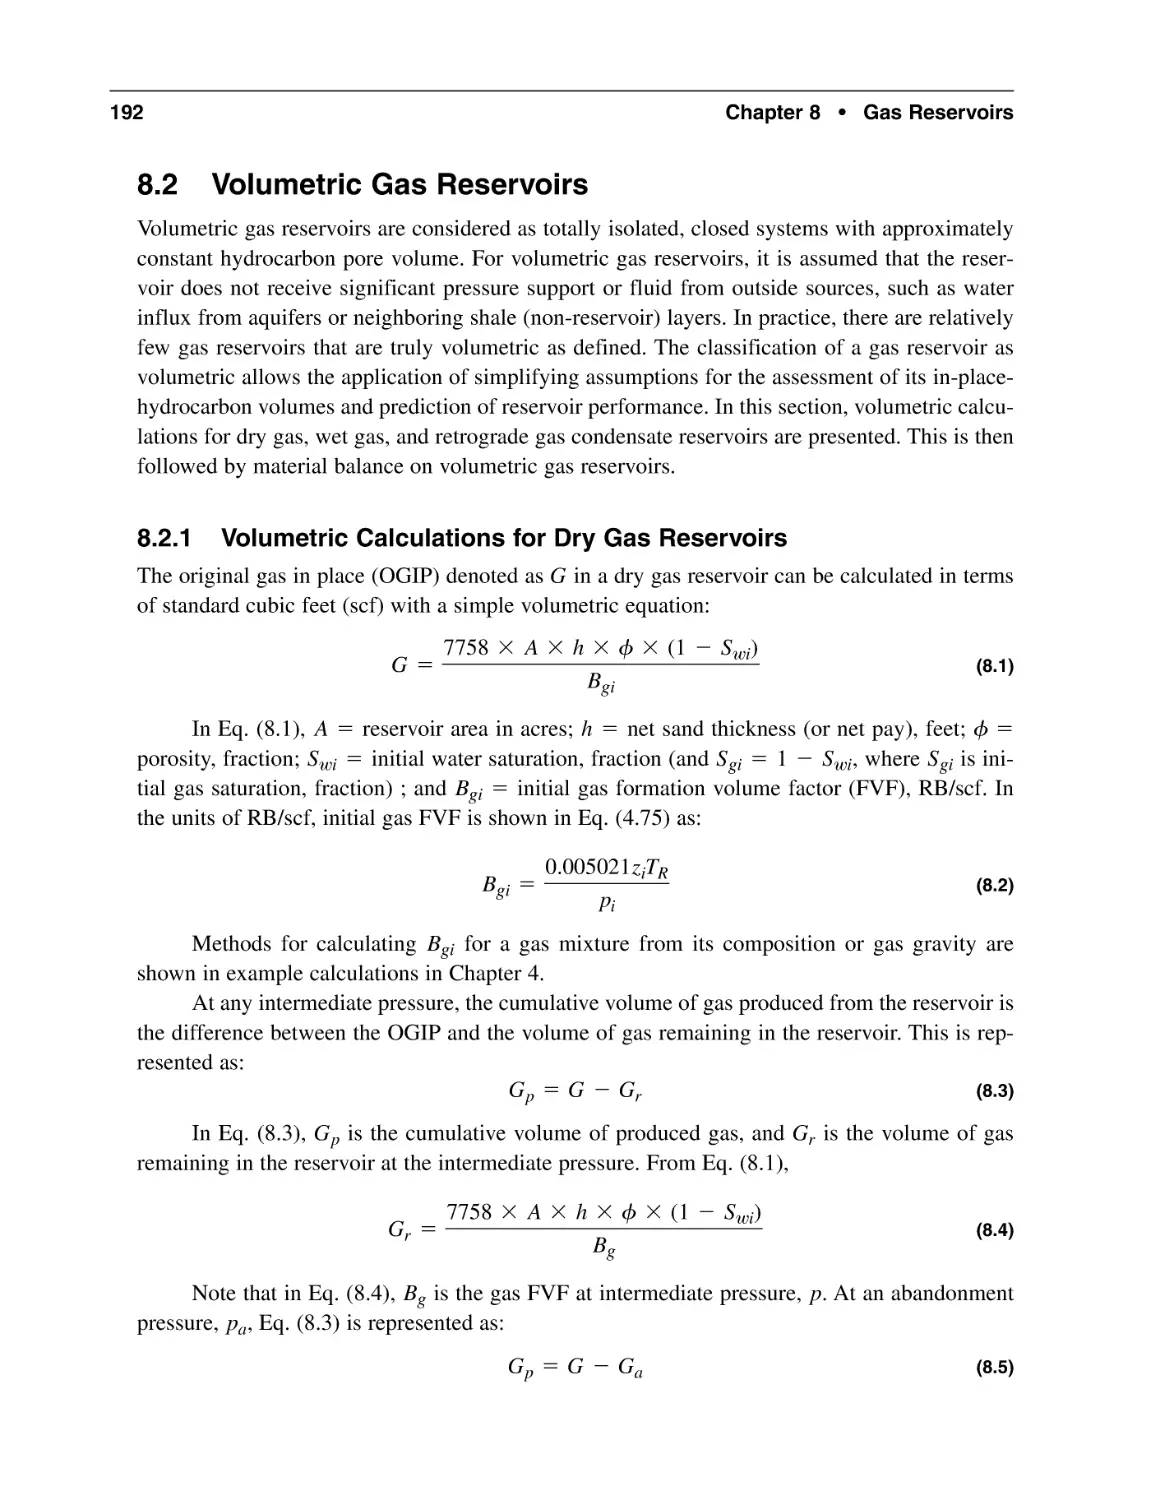 8.2 Volumetric Gas Reservoirs
8.2.1 Volumetric Calculations for Dry Gas Reservoirs